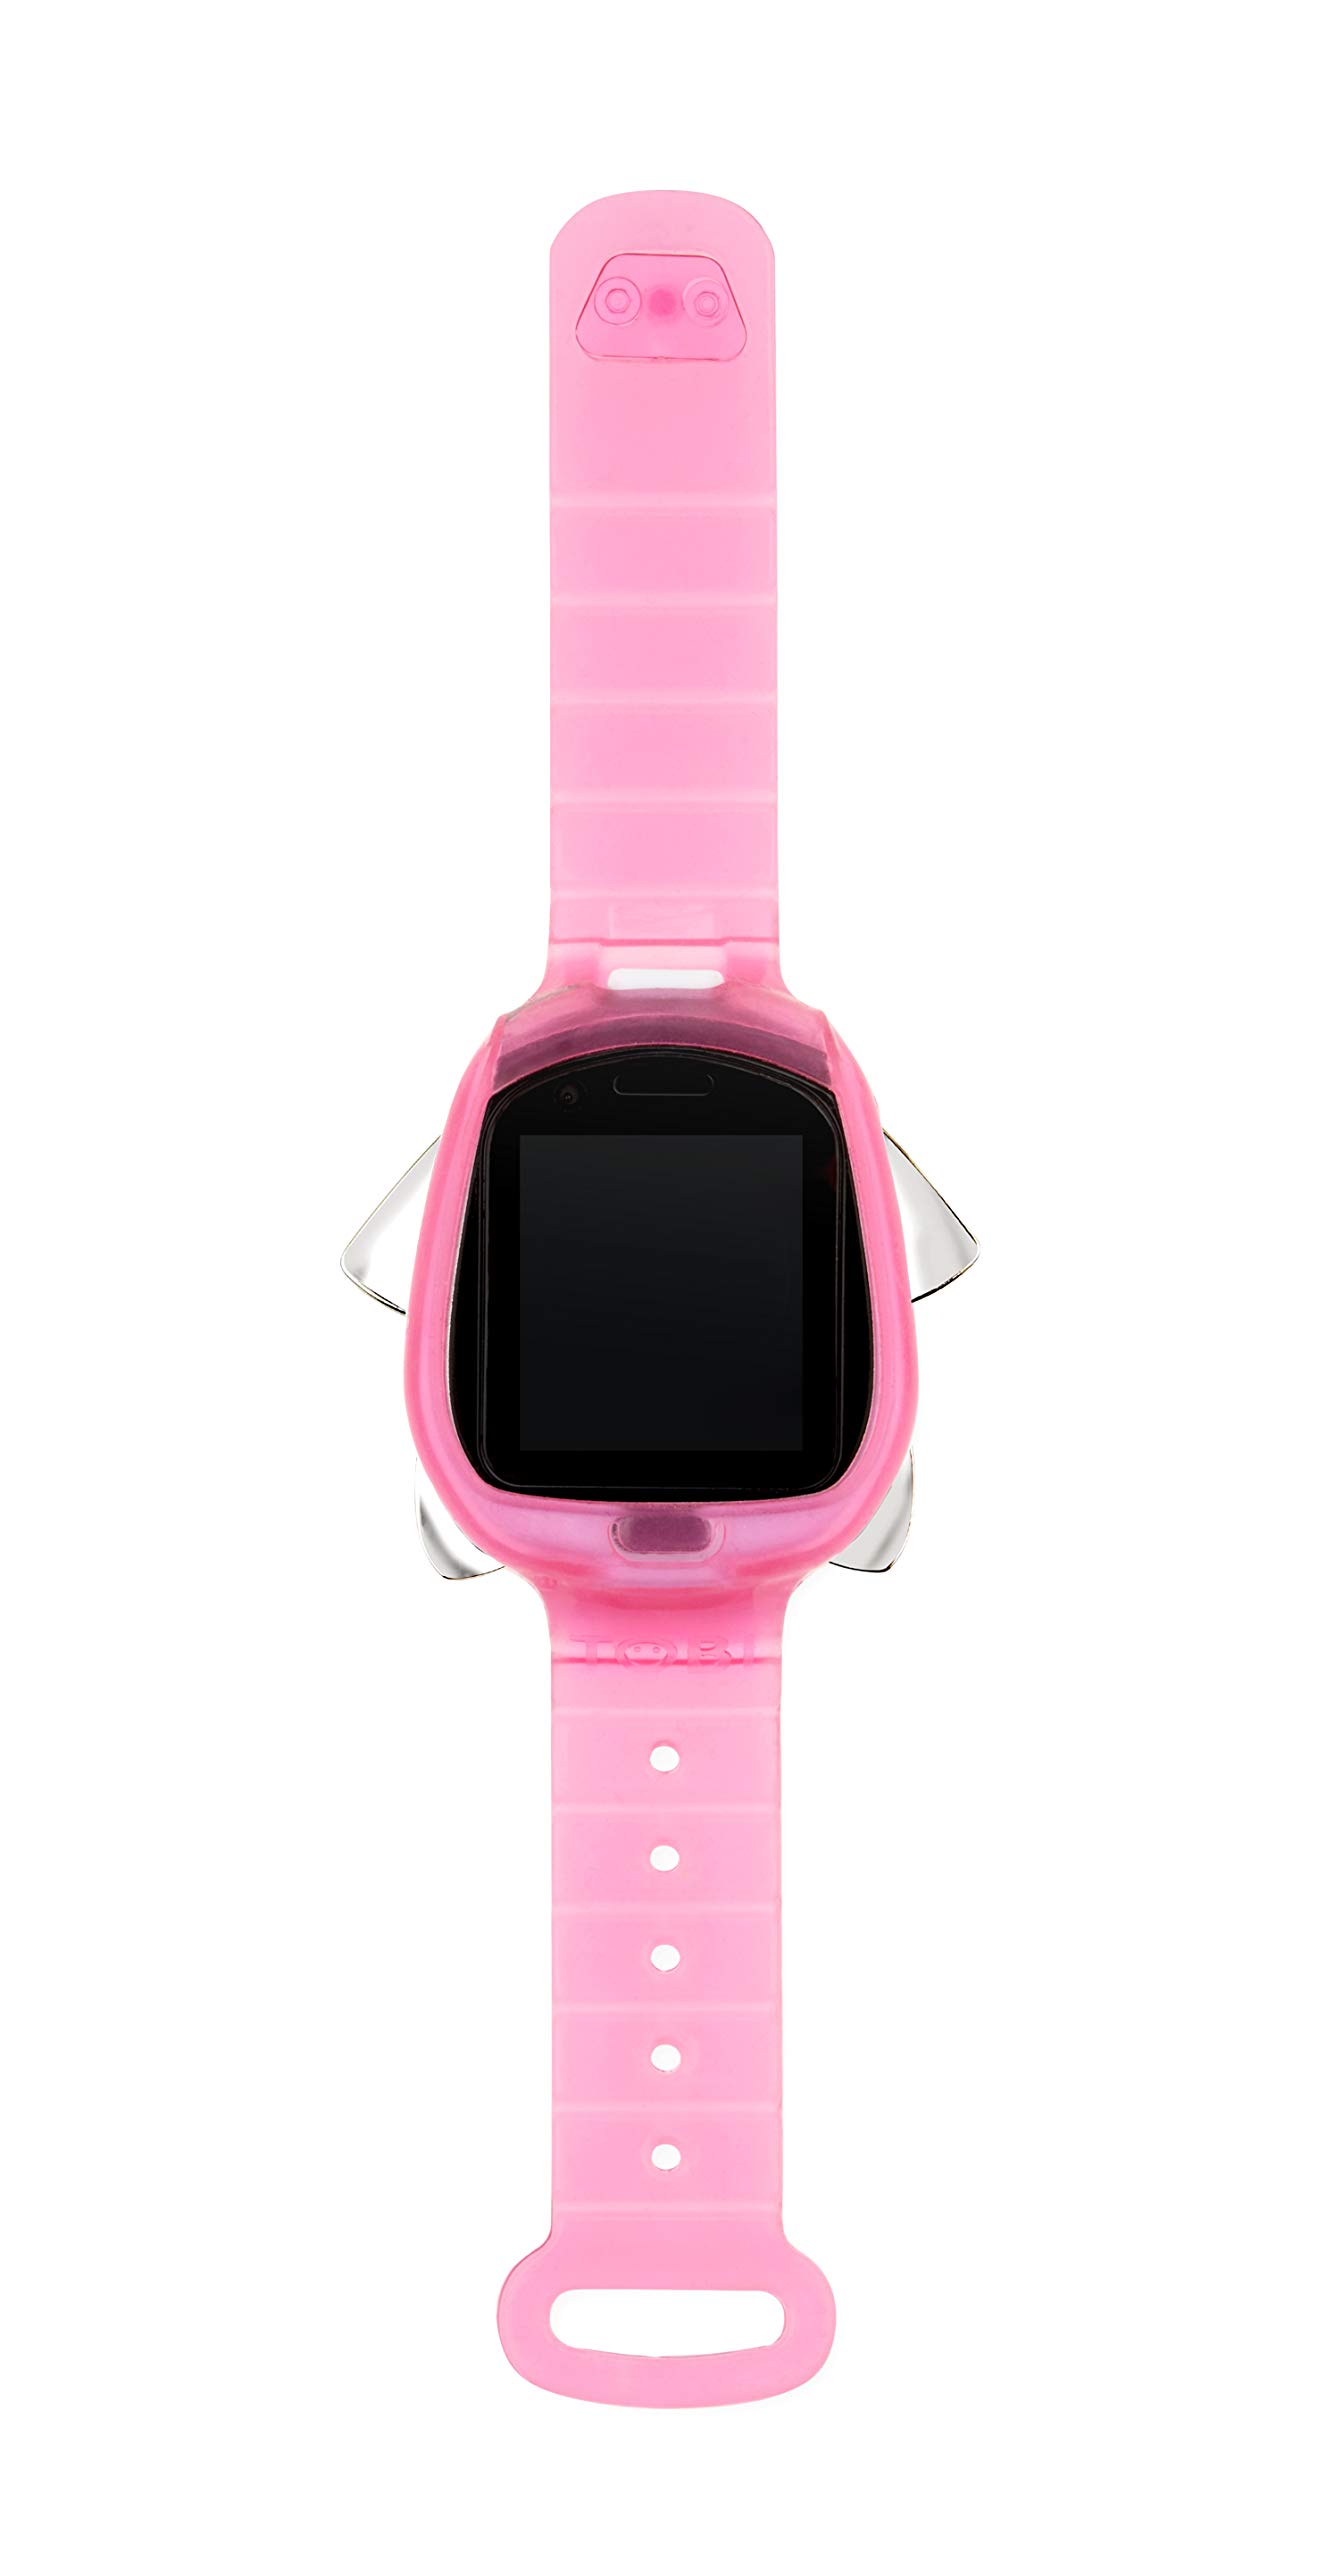 Little Tikes Tobi Robot Smartwatch - Pink with Movable Arms and Legs, Fun Expressions, Sound Effects, Play Games, Track Fitness and Steps, Built-in Cameras for Photo and Video 512 MB | Kids Age 4+